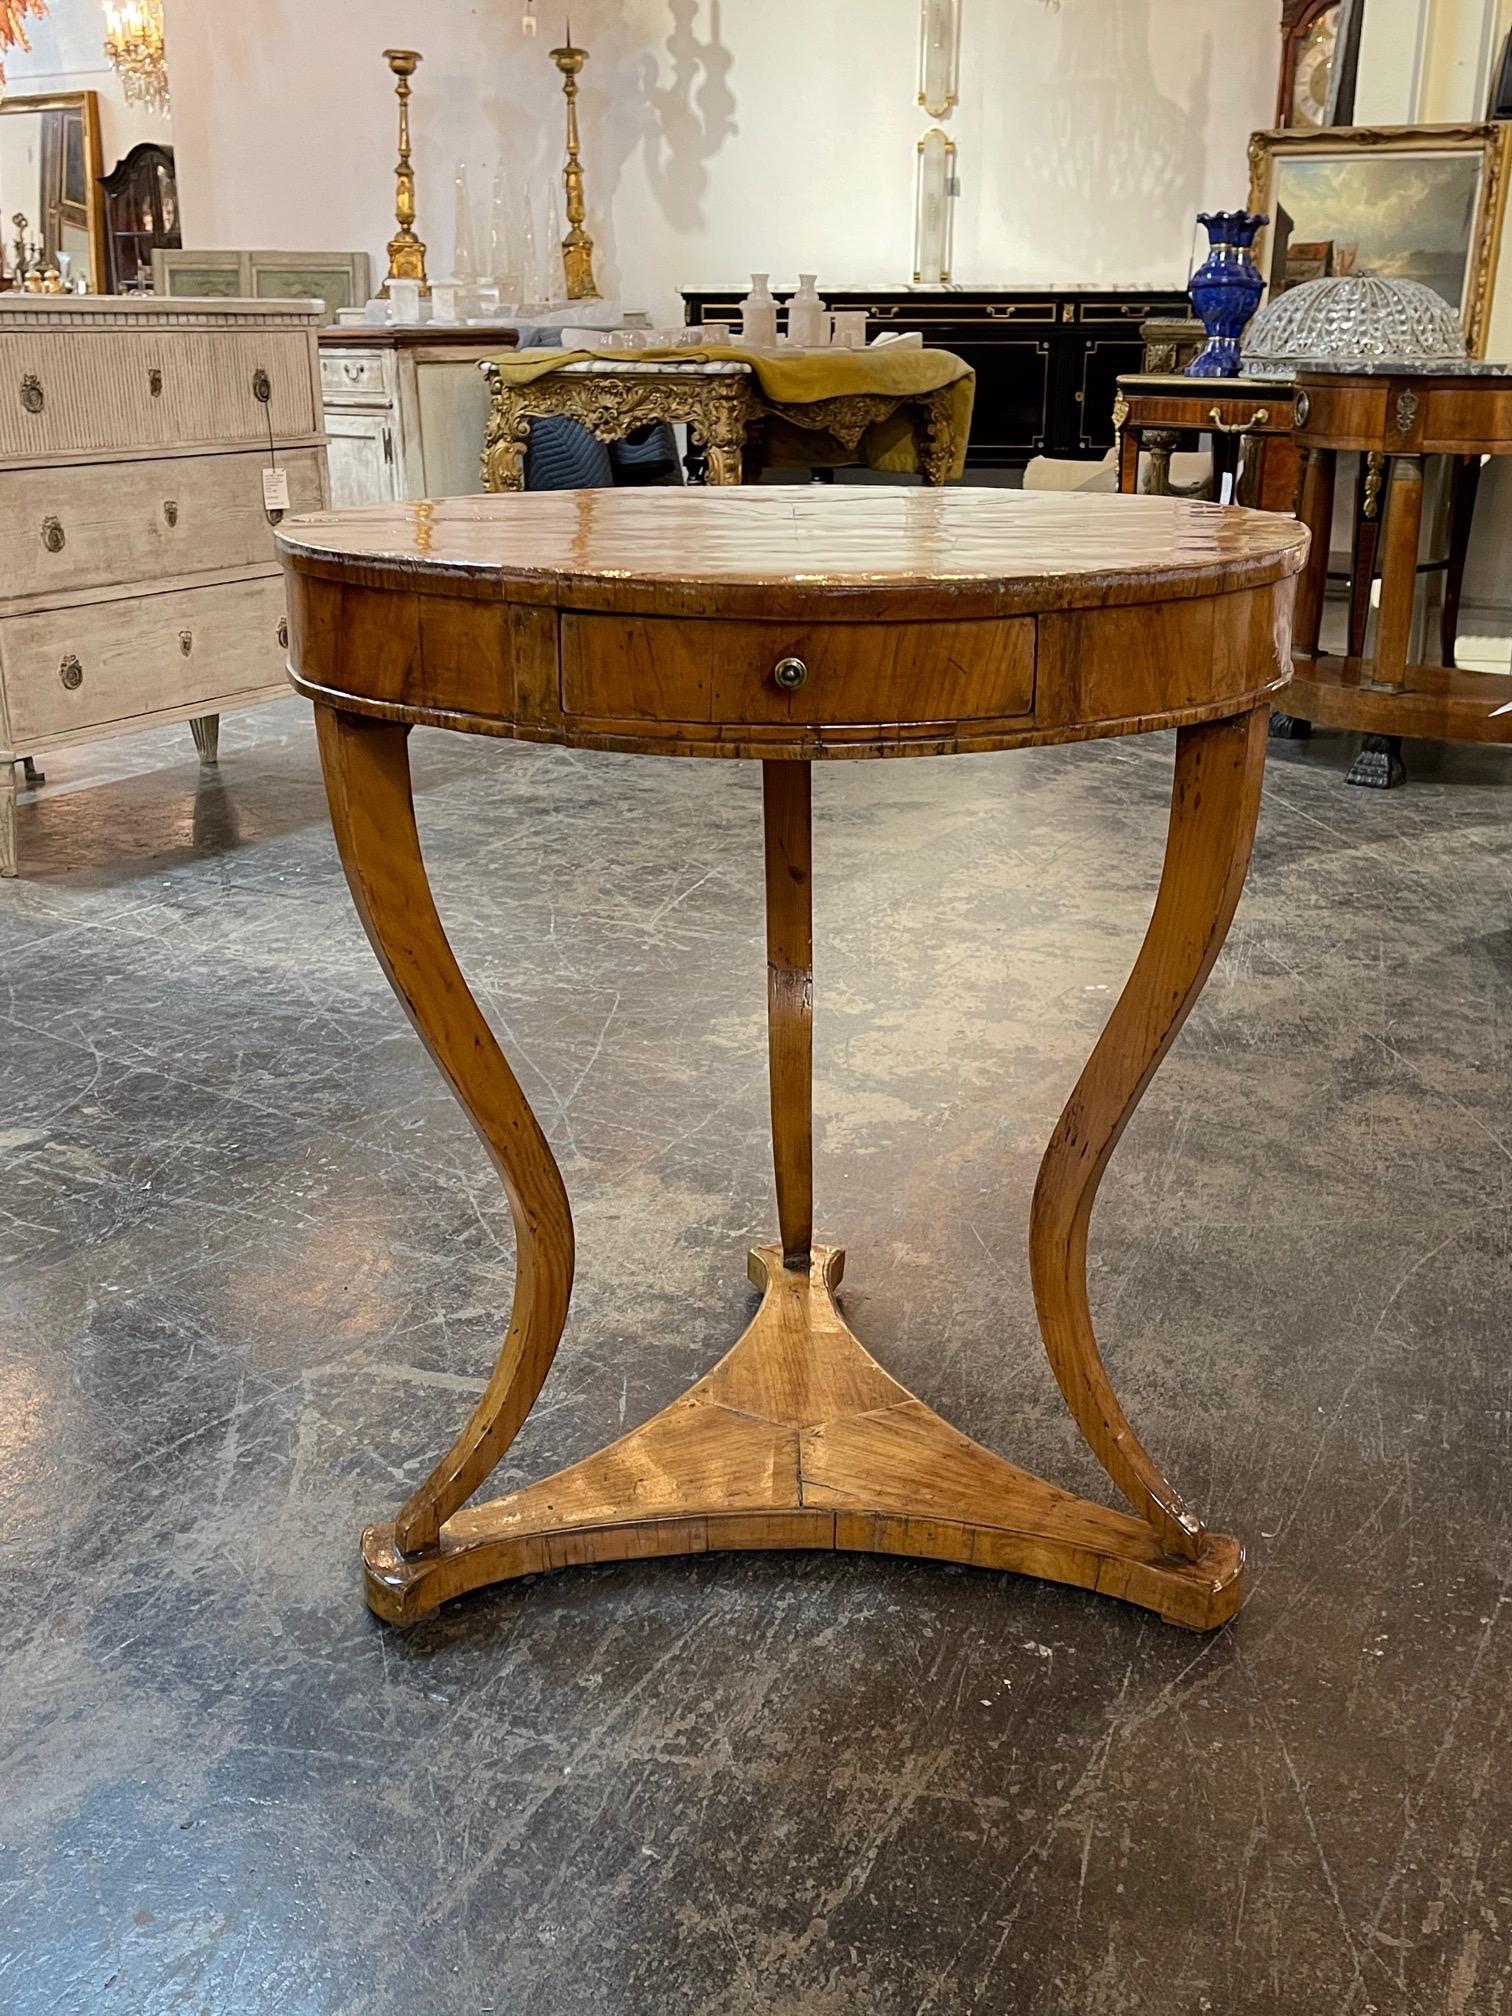 Gorgeous 18th century Northern Italian walnut side table with star inlay. A very fine quality piece with a beautiful finish. Fabulous!